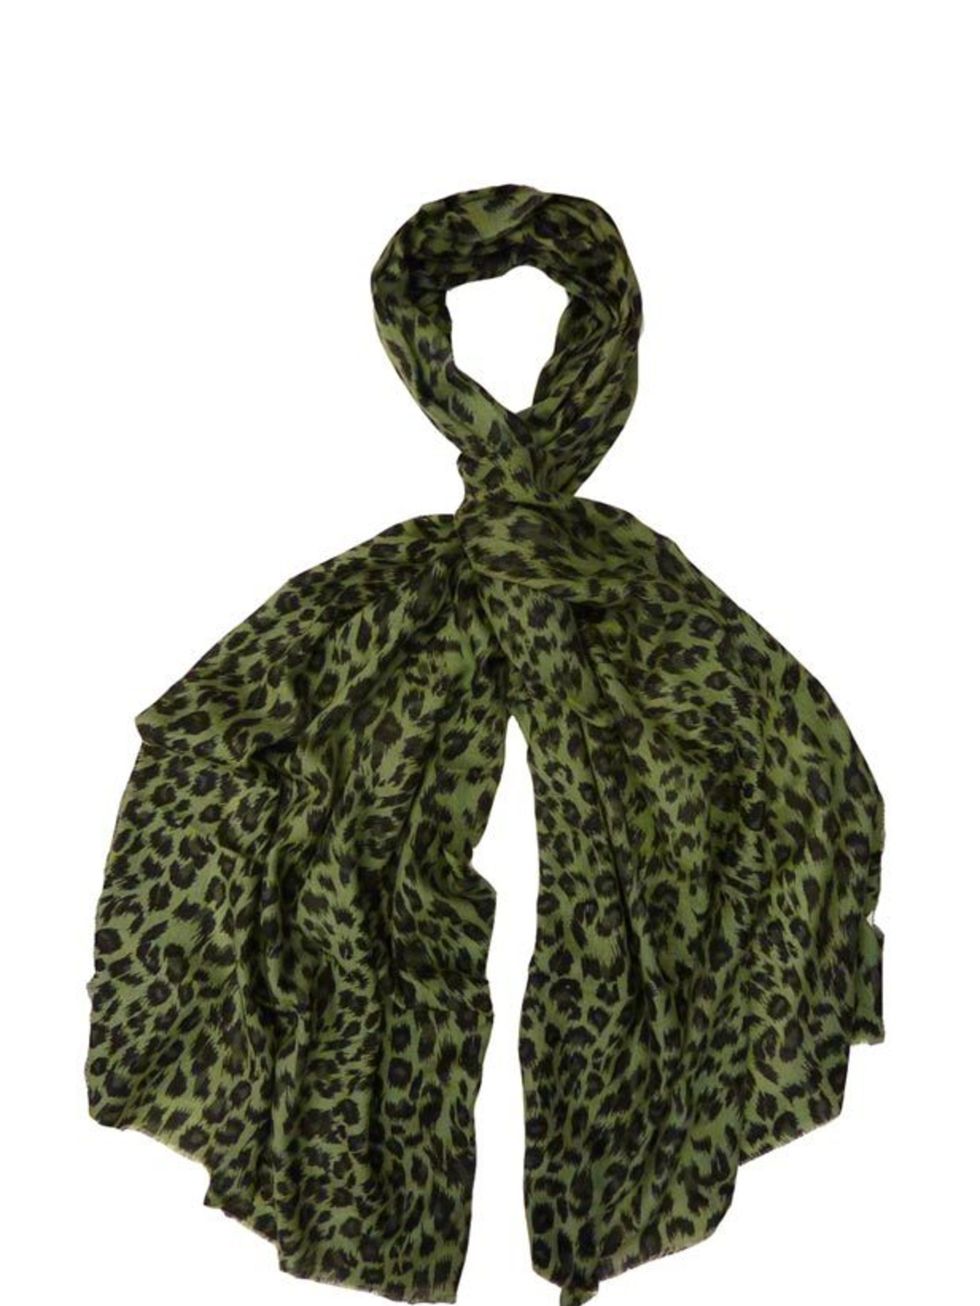 <p>Whether you're wearing a summer dress or tailored jacket, heading to a festival or the office, this summery printed scarf will keep you looking cool Lily and Lionel leopard print scarf, £85, at <a href="http://www.matchesfashion.com/">Matches</a></p>